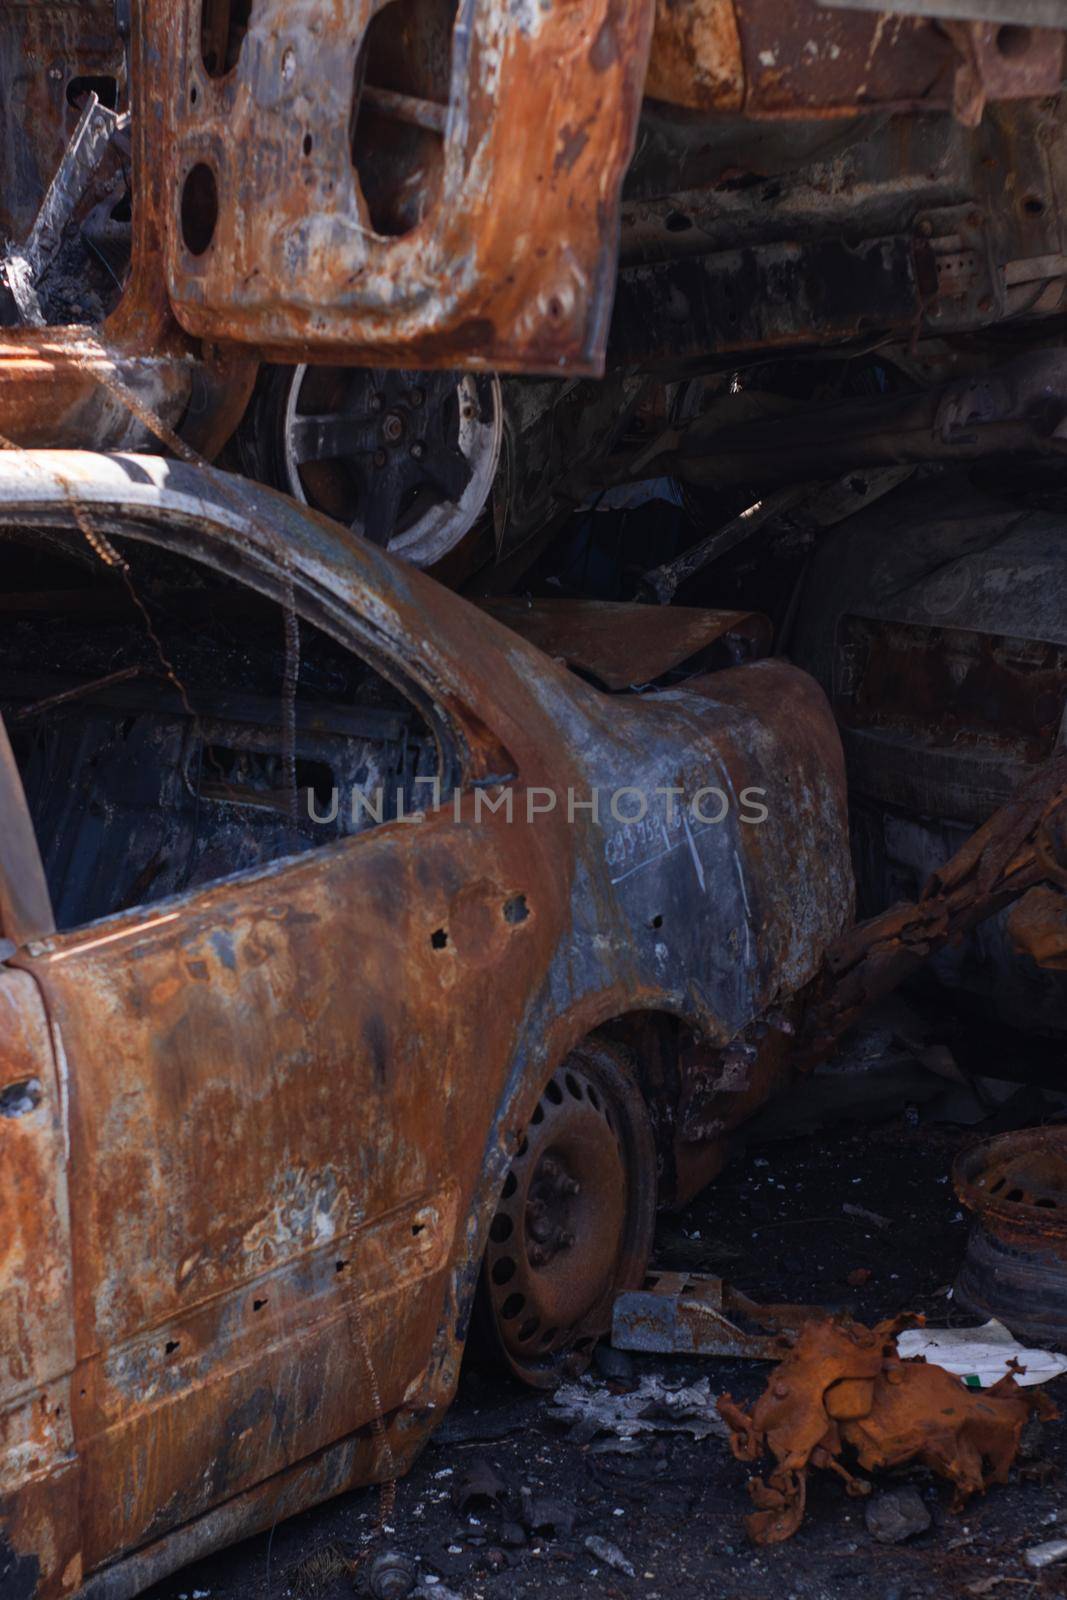 car graveyard. Burnt and blown up car. Cars damaged after shelling from russian invasion. War between Russia and Ukraine. Terror attack bomb shell. Disaster area irpin bucha by oliavesna